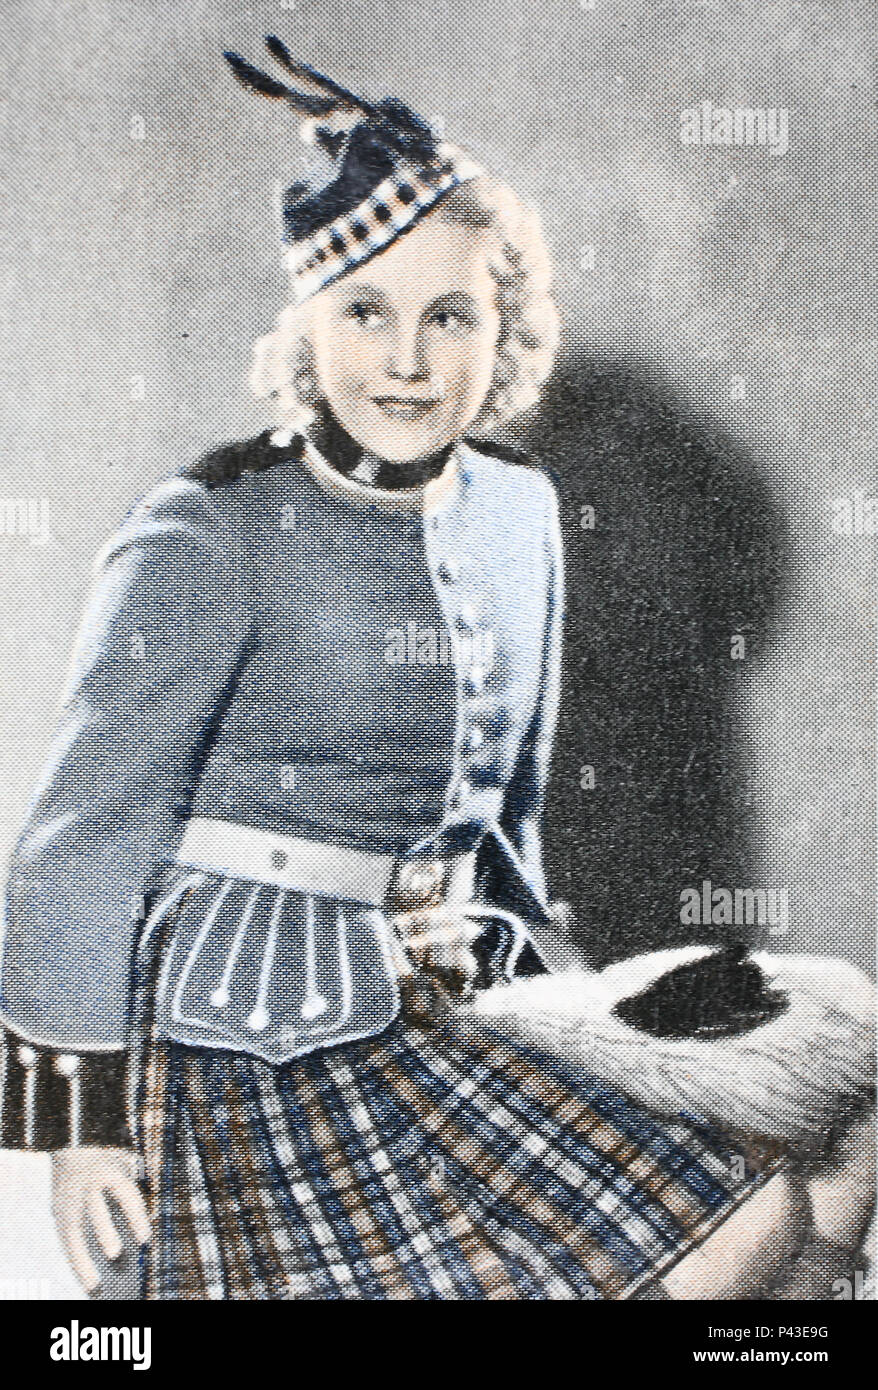 Anny Ondra, 15 May 1903-28 February 1987, was a Czech film actress. She was married to German boxing champion Max Schmeling, digital improved reproduction of an historical image Stock Photo